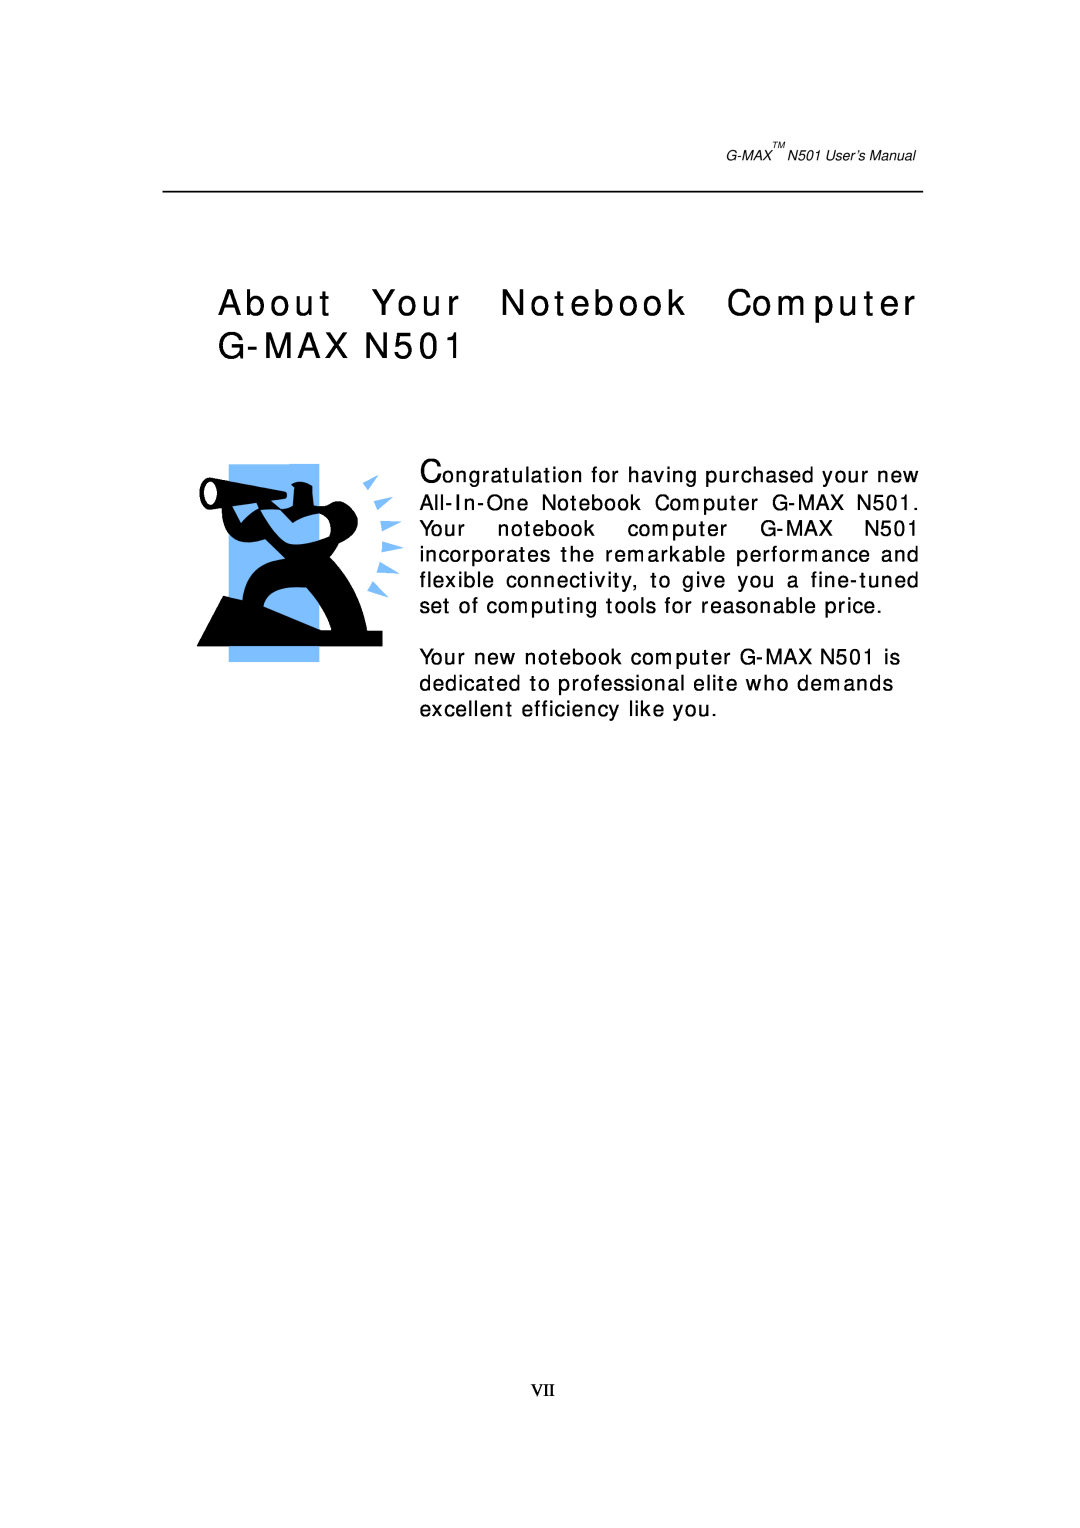 Gigabyte user manual About Your Notebook Computer G-MAX N501 